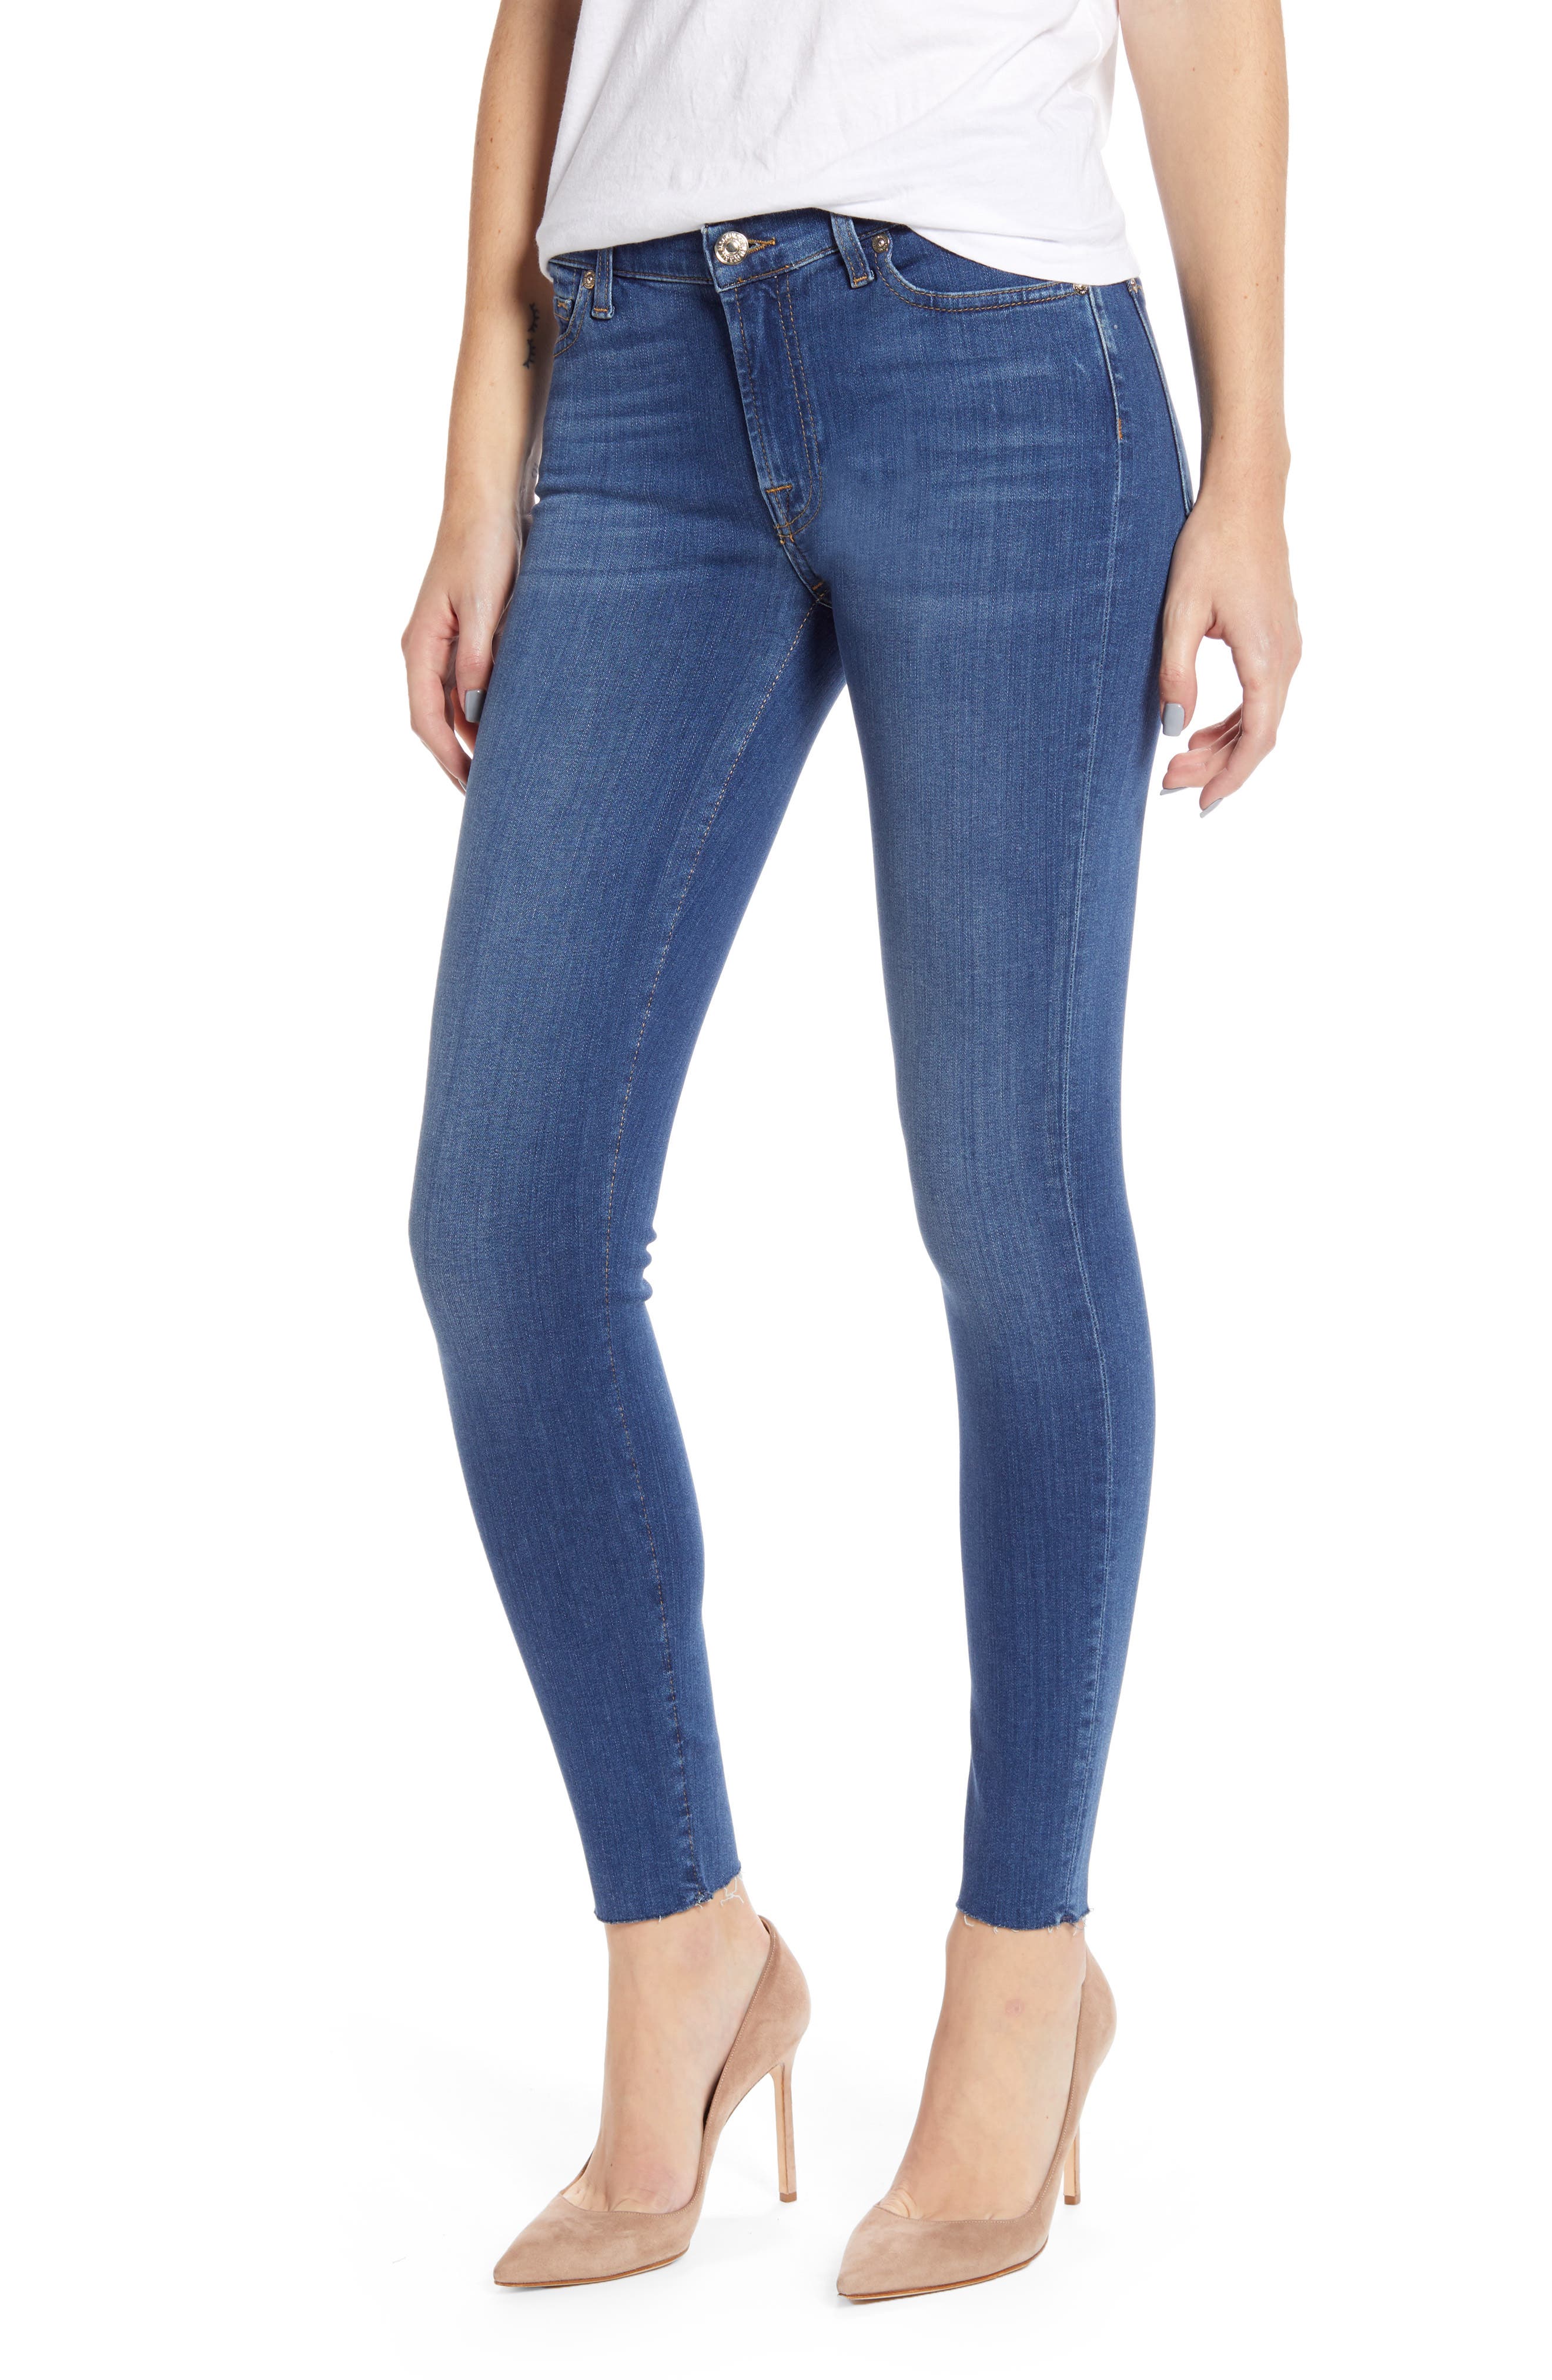 7 for all mankind slim illusion luxe high waist skinny